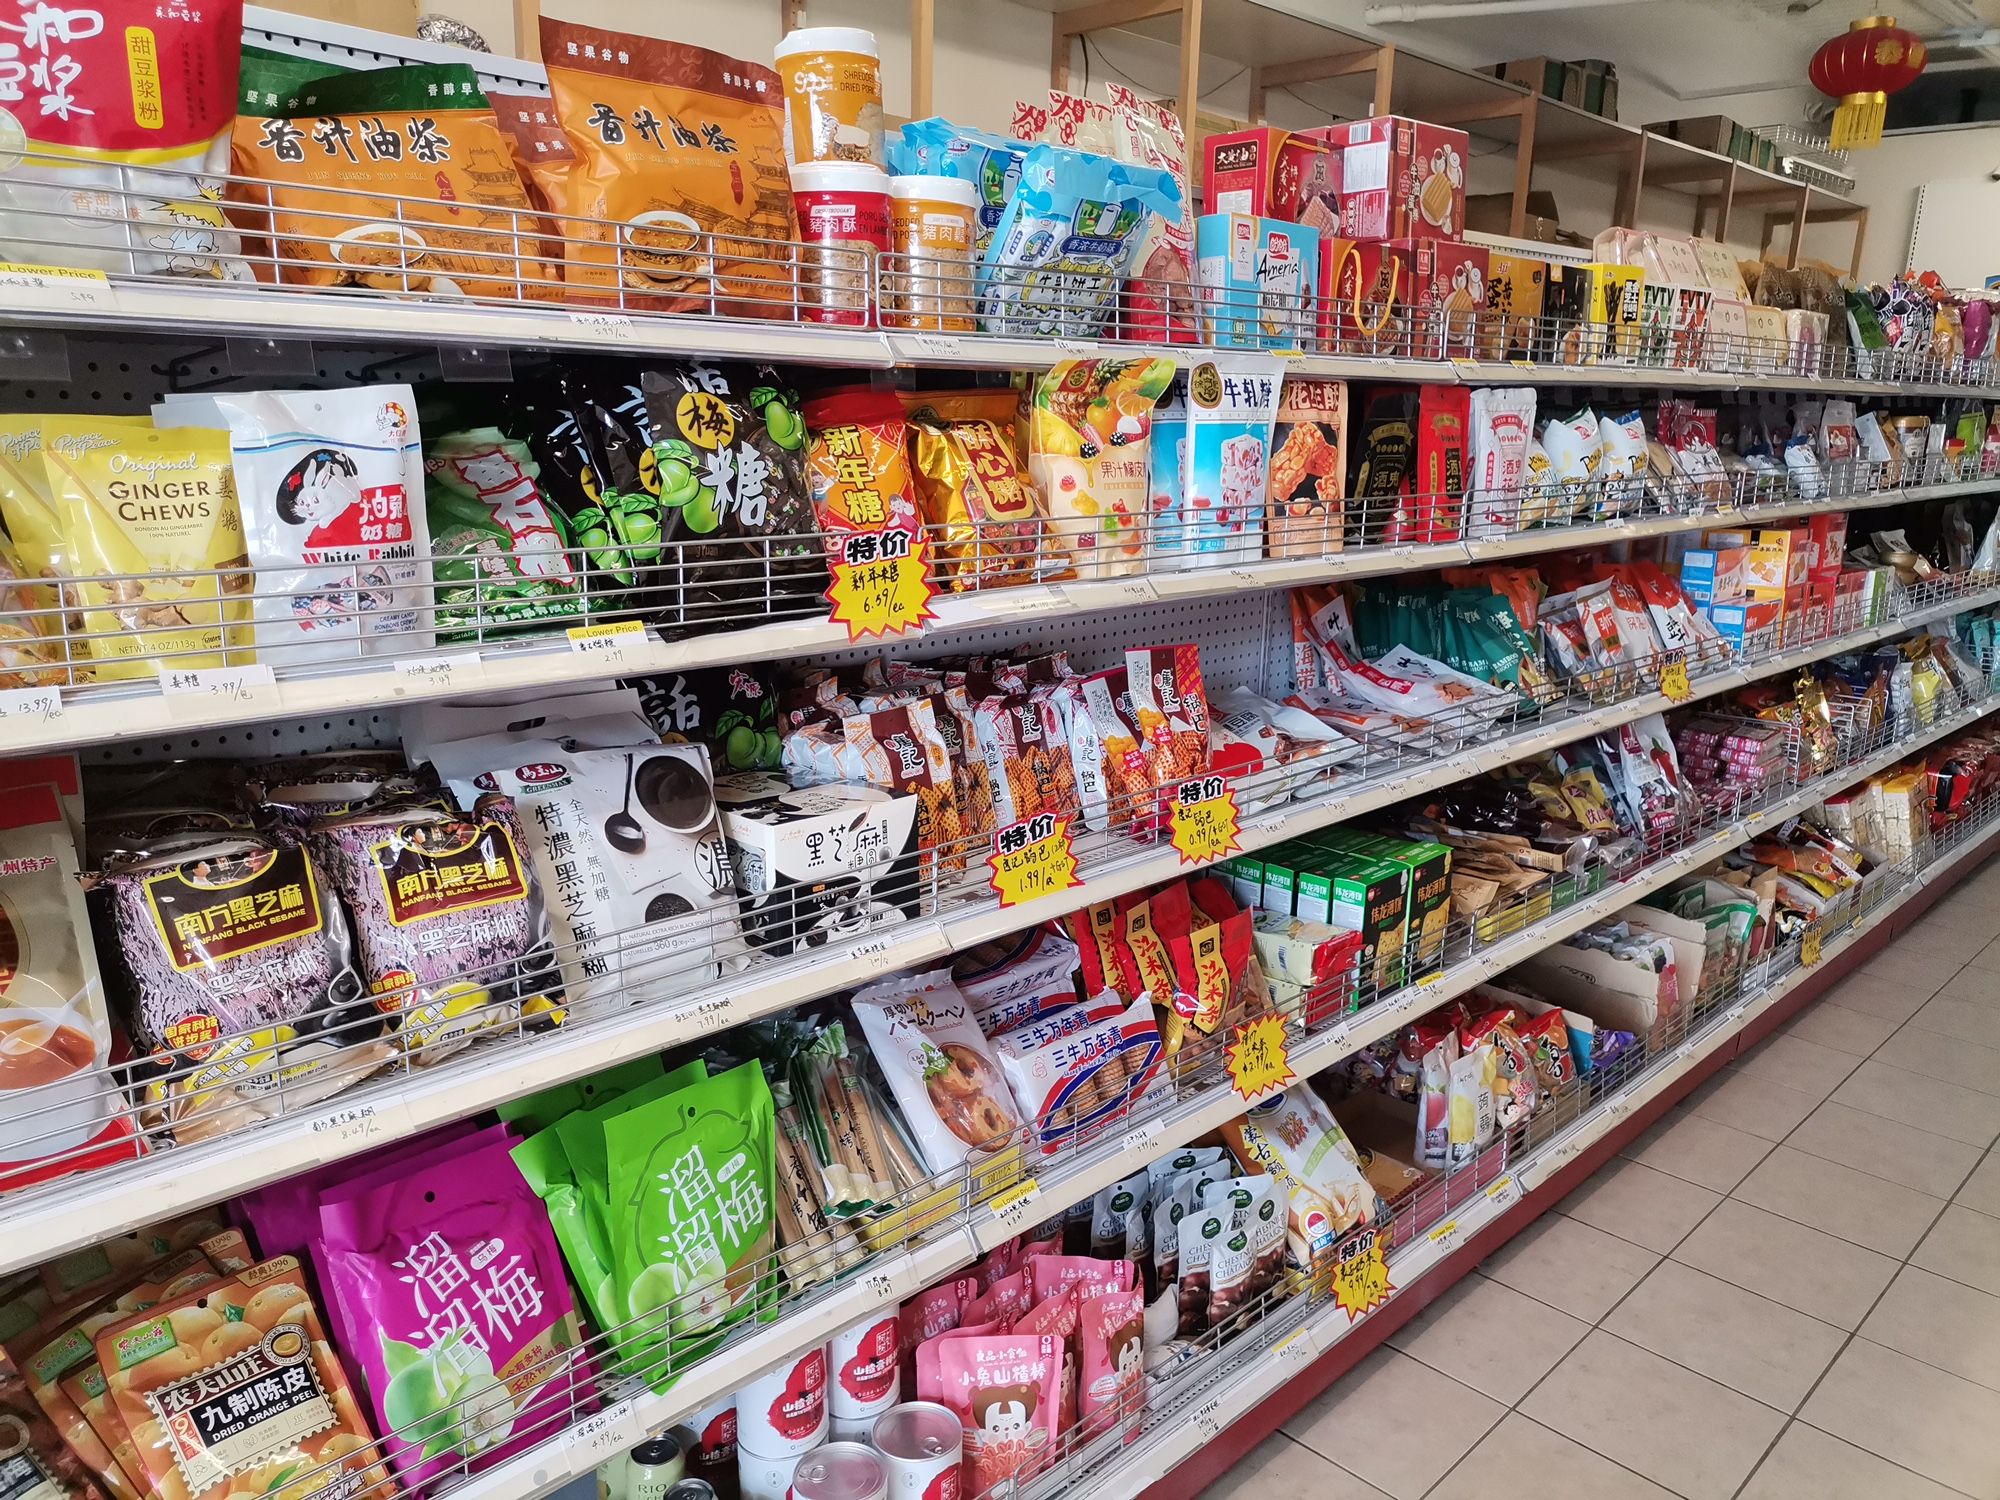 business for sale Calgary Alberta, grocery store for sale Calgary Alberta, convenience store for sale Calgary Alberta